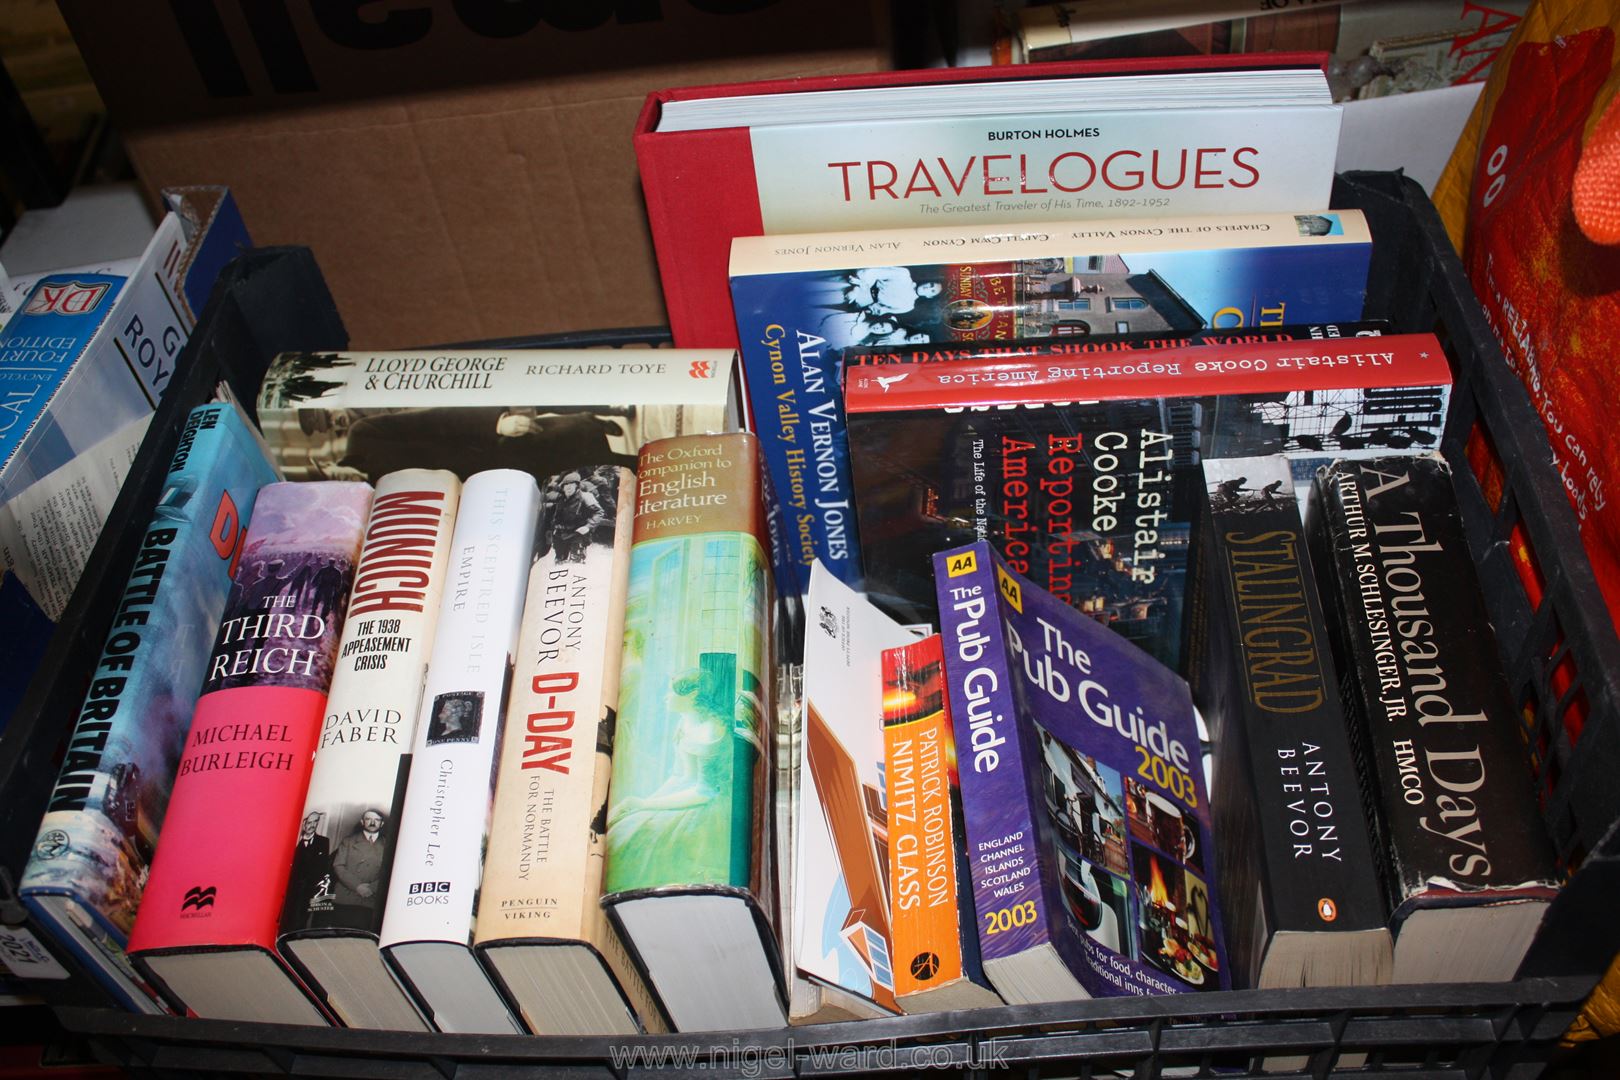 A box and crate of Books incl. Travelogues, the Third Reich, A-Z of family medical, etc.